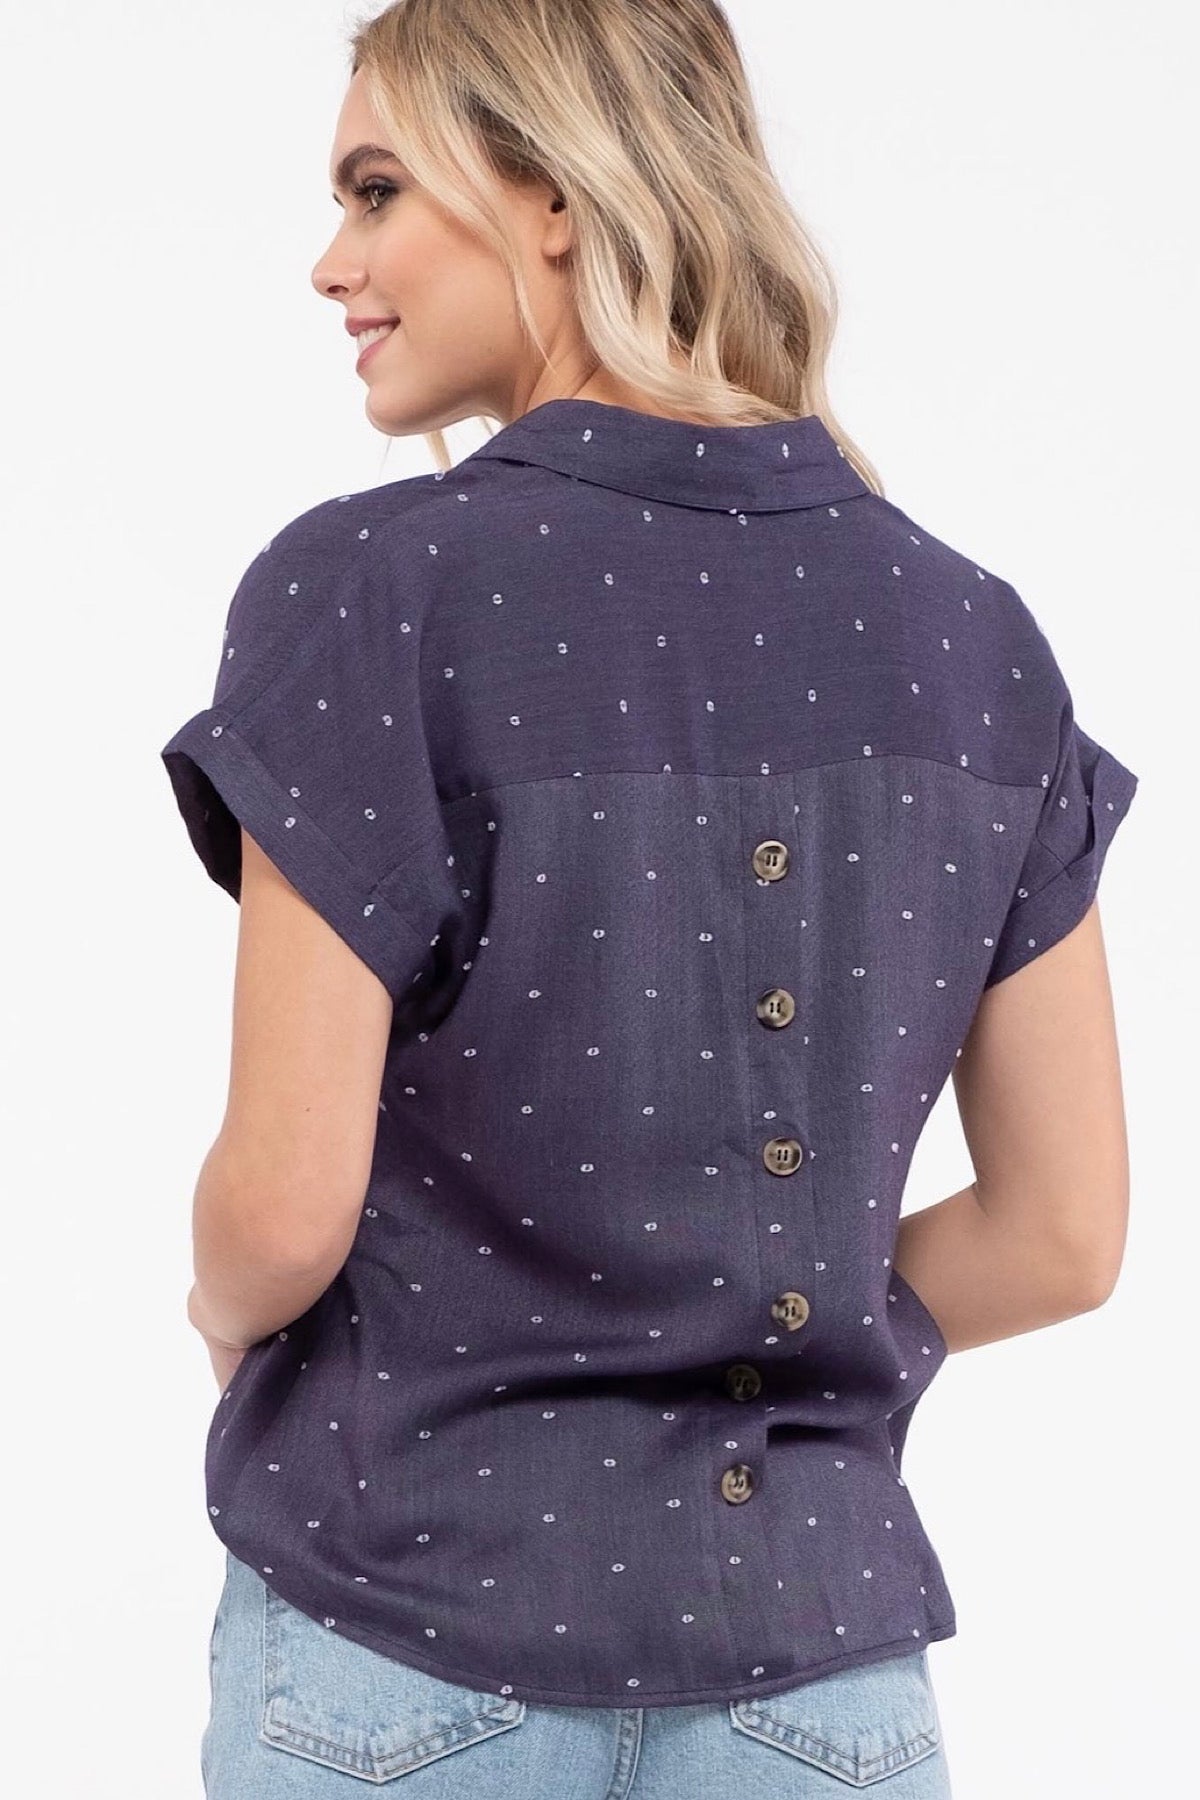 Gretchen Dotted Blouse